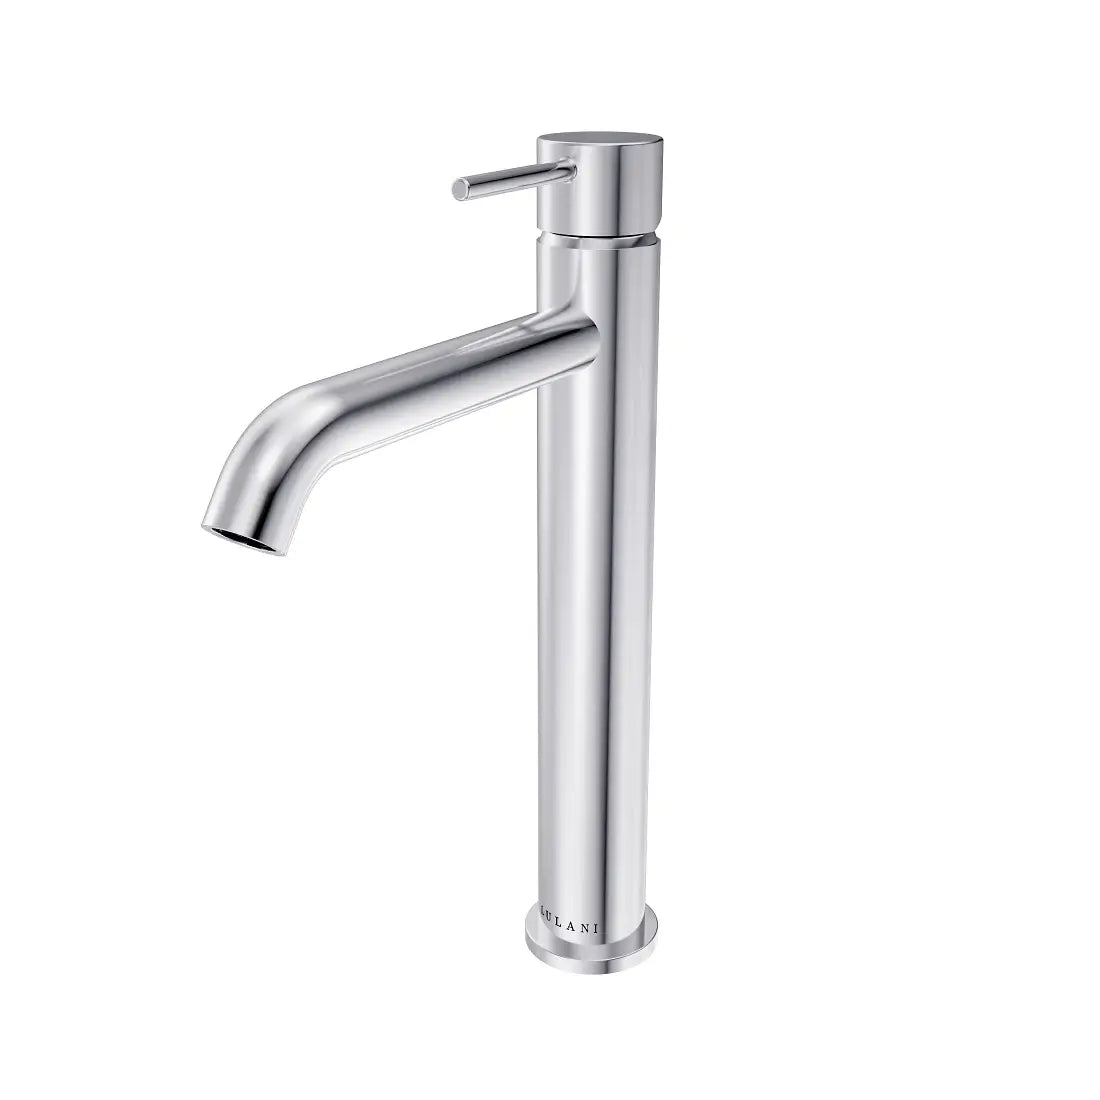 St. Lucia - Vessel Height Bathroom Faucet (petite) with drain assembly in Chrome